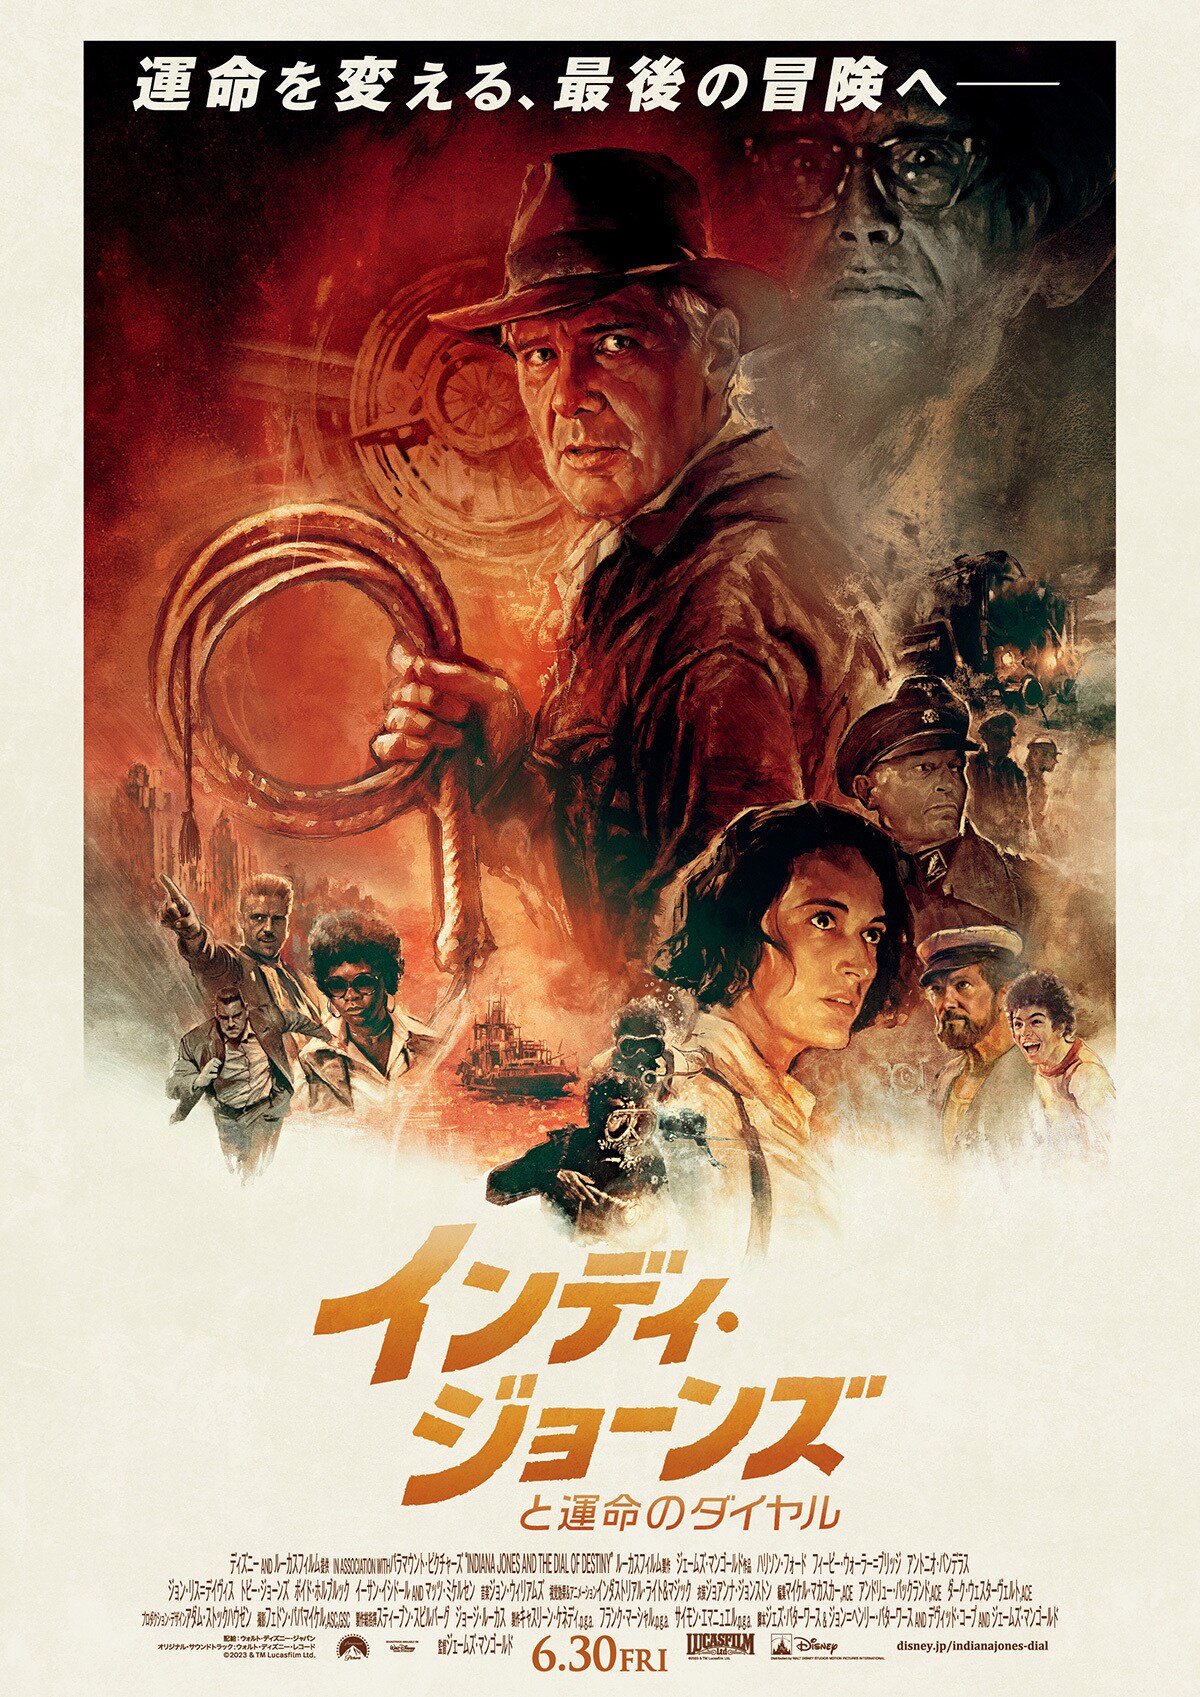 Harrison Ford returns to the role of the legendary hero archaeologist for this fifth installment of the iconic franchise. Starring along with Ford are Phoebe Waller-Bridge (“Fleabag”), Antonio Banderas (“Pain and Glory”), John Rhys-Davies (“Raiders of the Los Ark”), Shaunette Renee Wilson (“Black Panther”), Thomas Kretschmann (“Das Boot”), Toby Jones (“Jurassic World: Fallen Kingdom”), Boyd Holbrook (“Logan”), Oliver Richters (“Black Widow”), Ethann Isidore (“Mortel”) and Mads Mikkelsen (“Fantastic Beasts: The Secrets of Dumbledore”). Directed by James Mangold (“Ford v Ferrari,” “Logan”), the film is produced by Kathleen Kennedy, Frank Marshall and Simon Emanuel, with Steven Spielberg and George Lucas serving as executive producers. John Williams, who has scored each Indy adventure since the original "Raiders of the Lost Ark" in 1981, is once again composing the score.